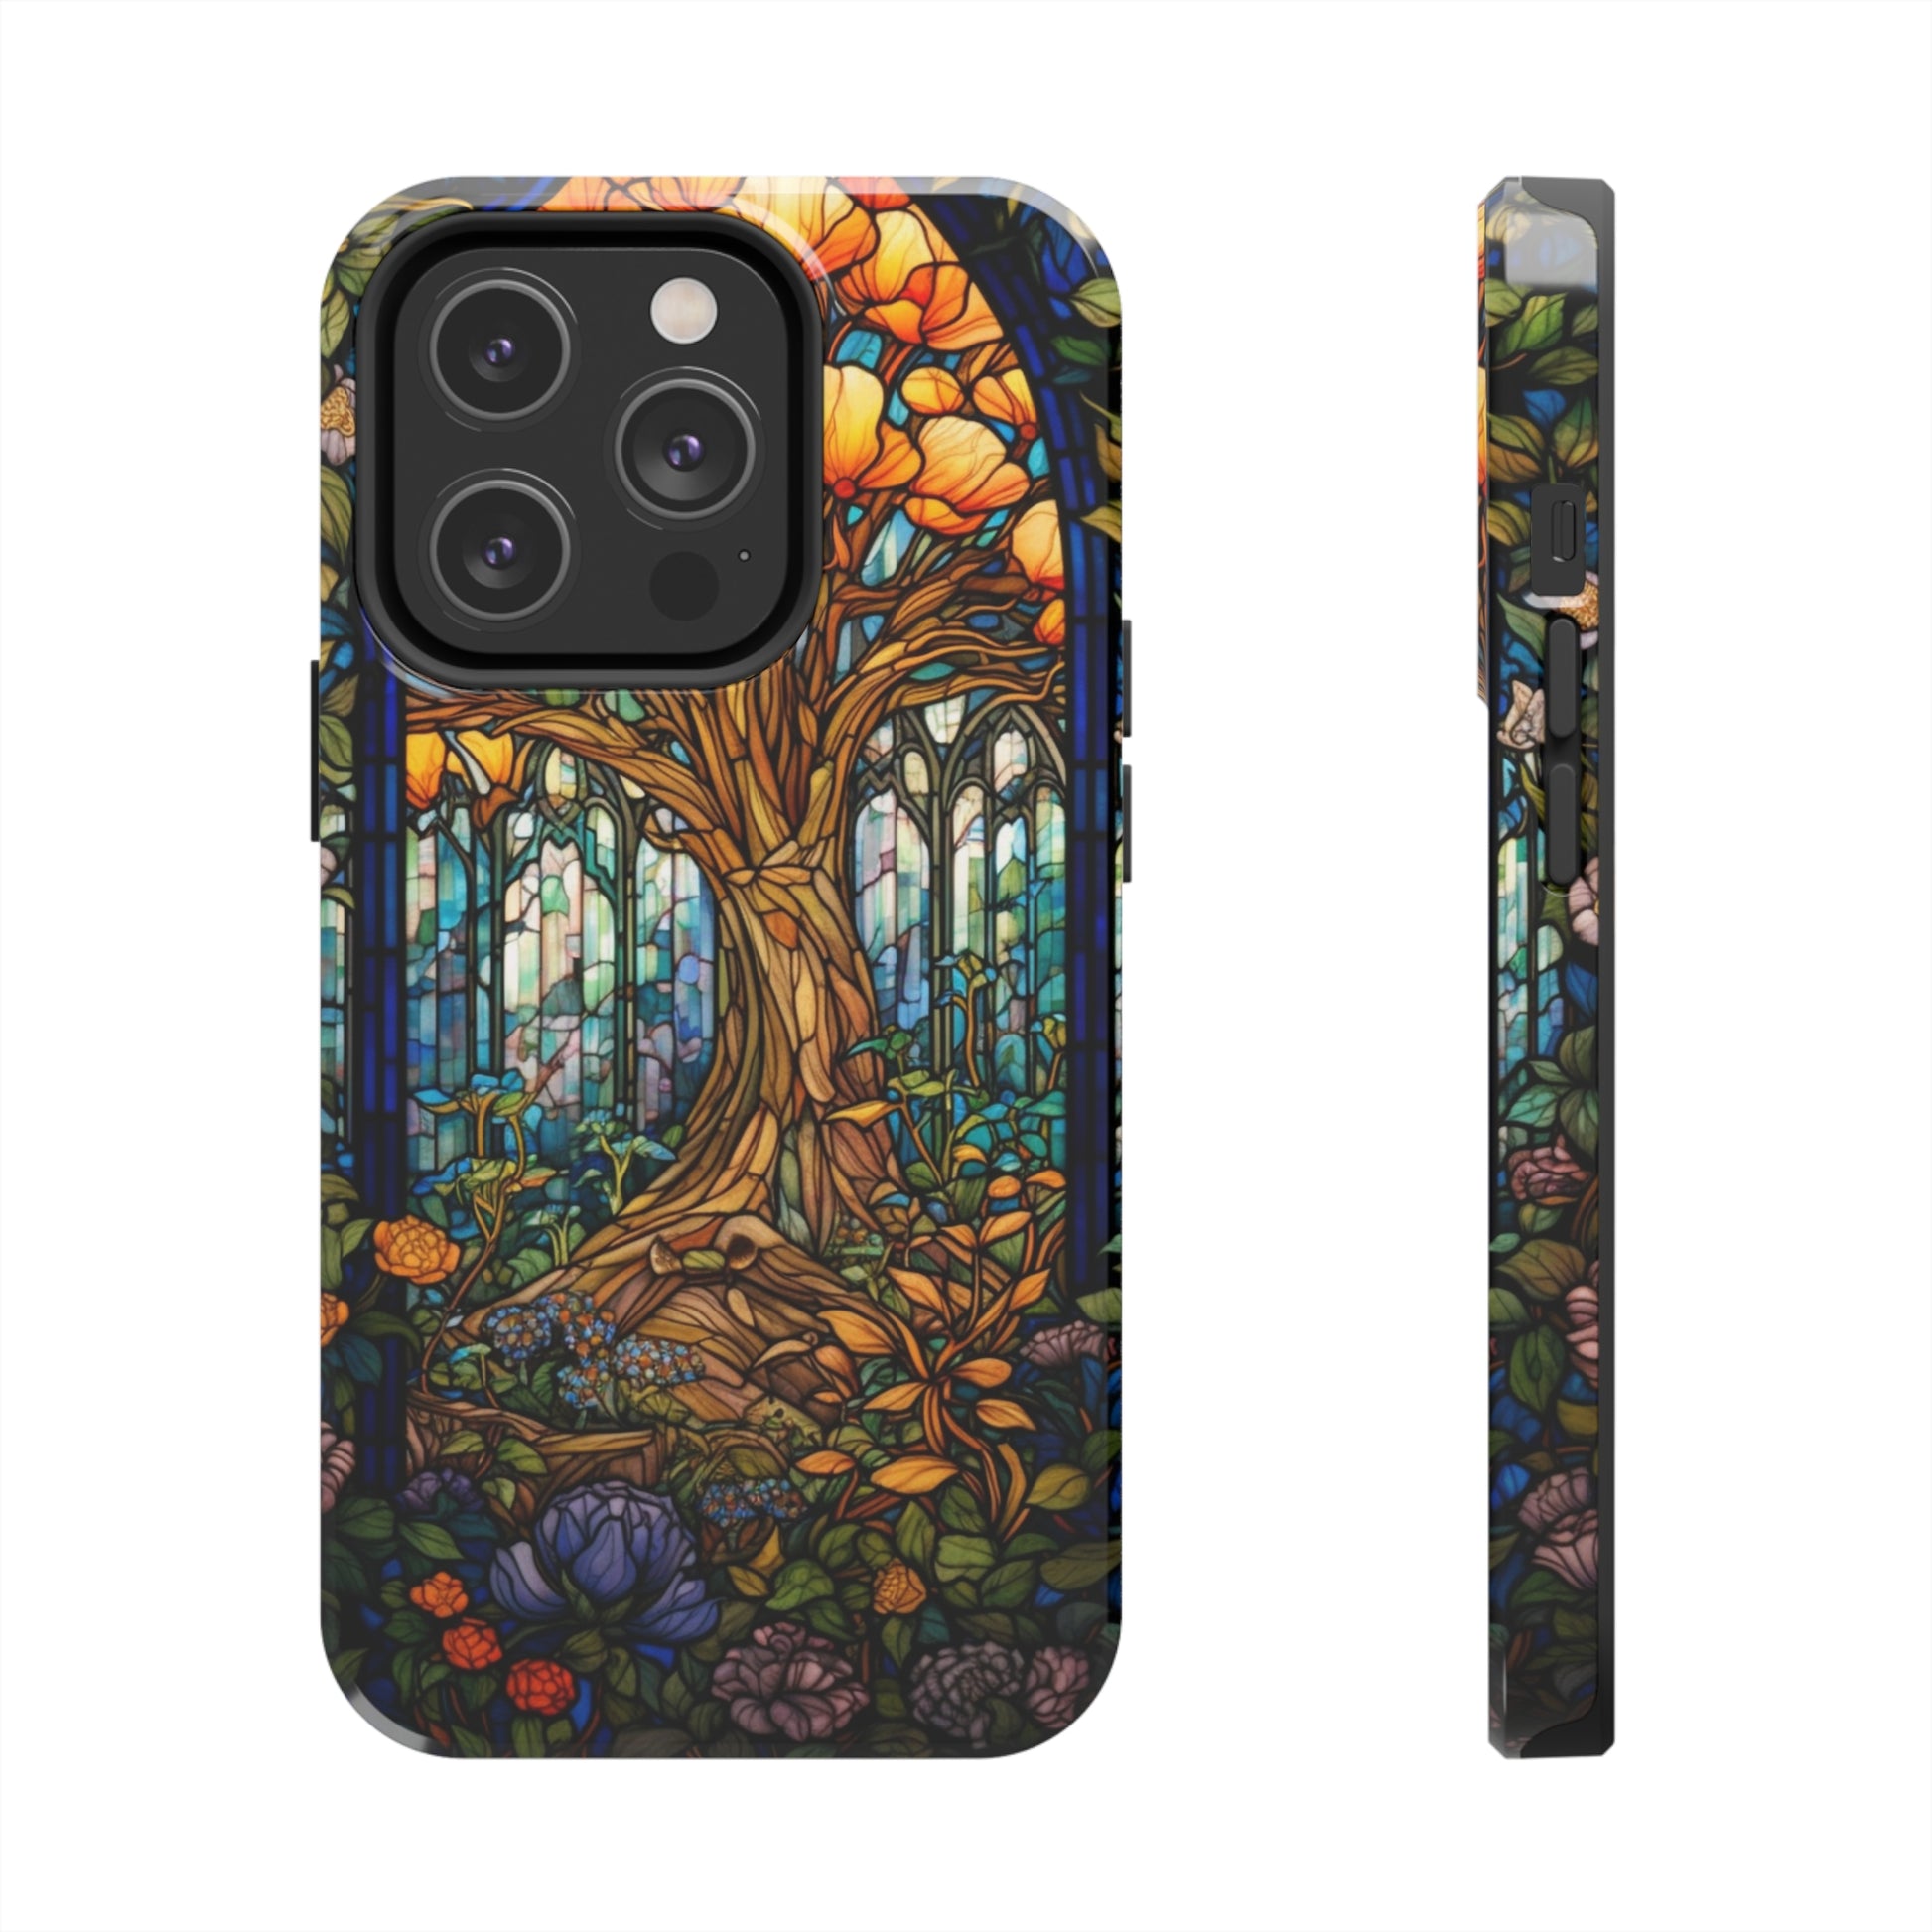 Nature-Inspired iPhone Protective Case with Stained Glass Aesthetics